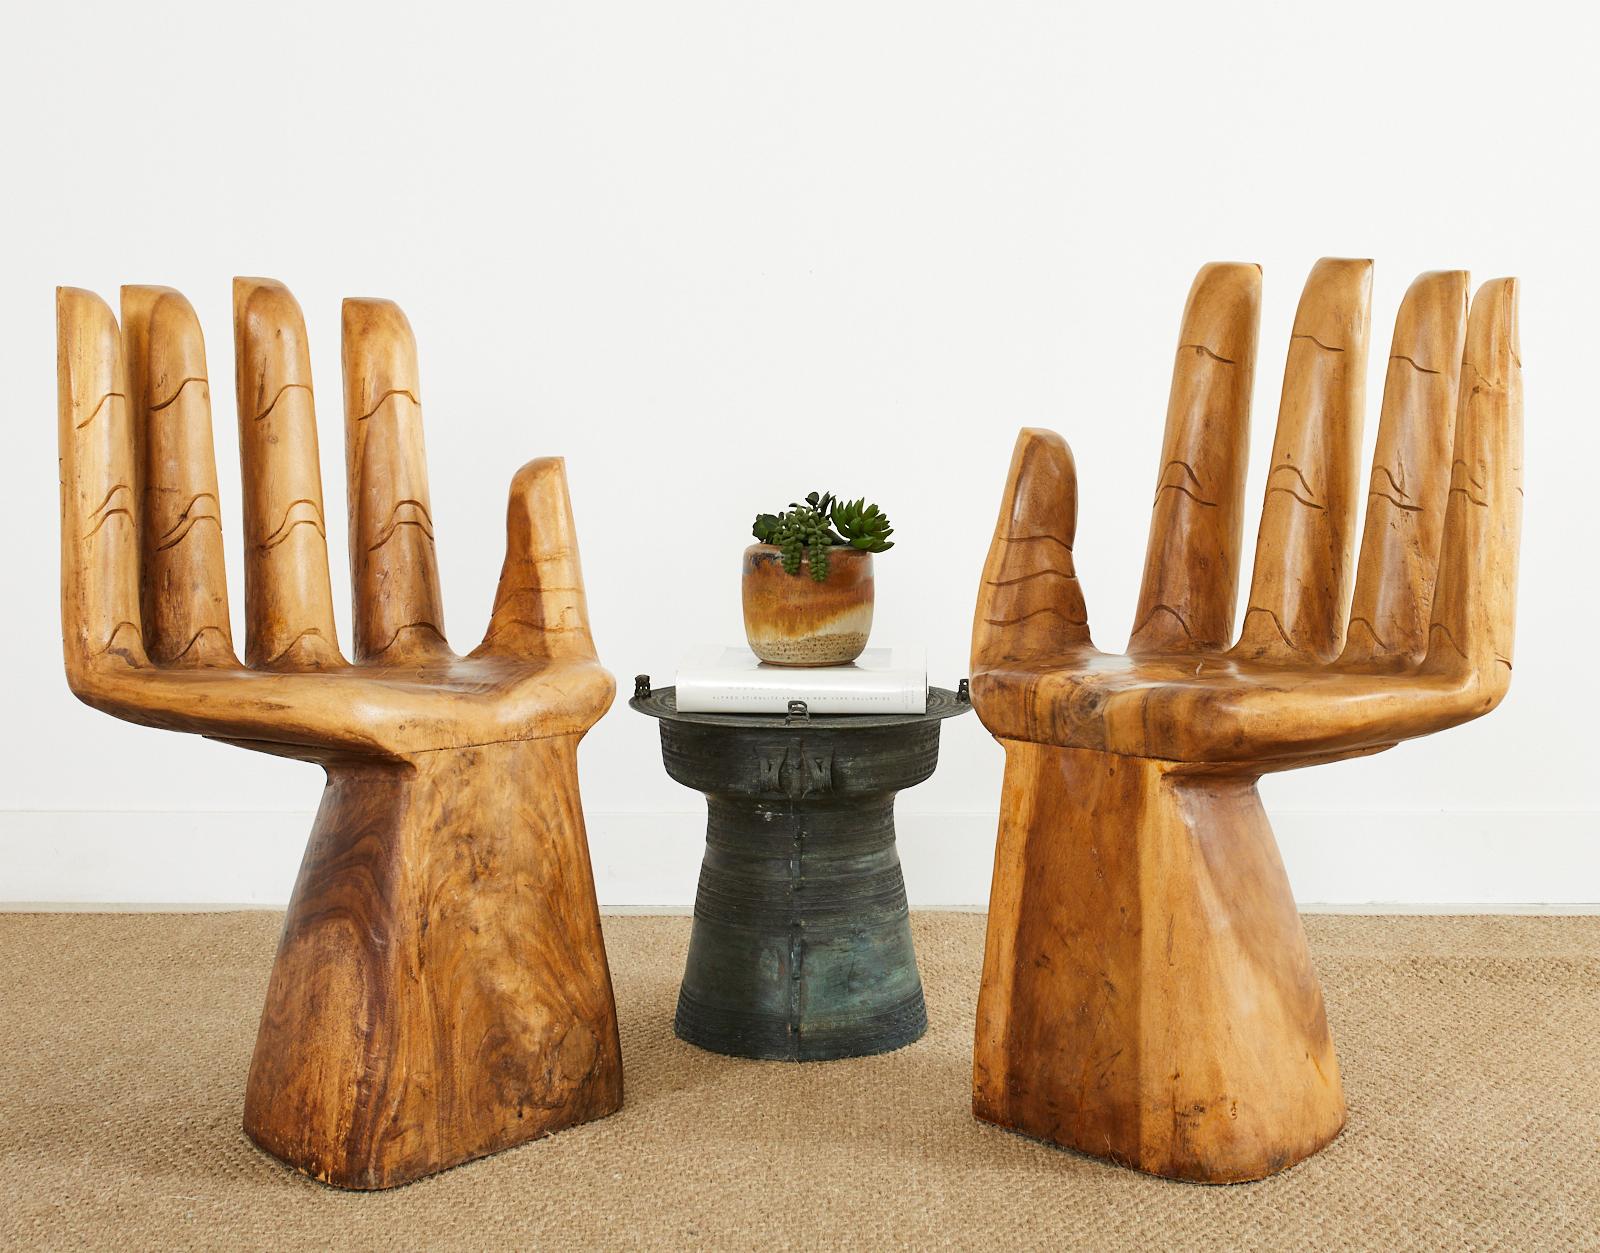 Sculptural pair of hardwood carved hand chairs made in the iconic manner and style of Pedro Friedeberg (Mexican b. 1936). The outside of the chairs have intricately carved nails and joints. The hands are mounted to heavy solid wood pedestal bases.